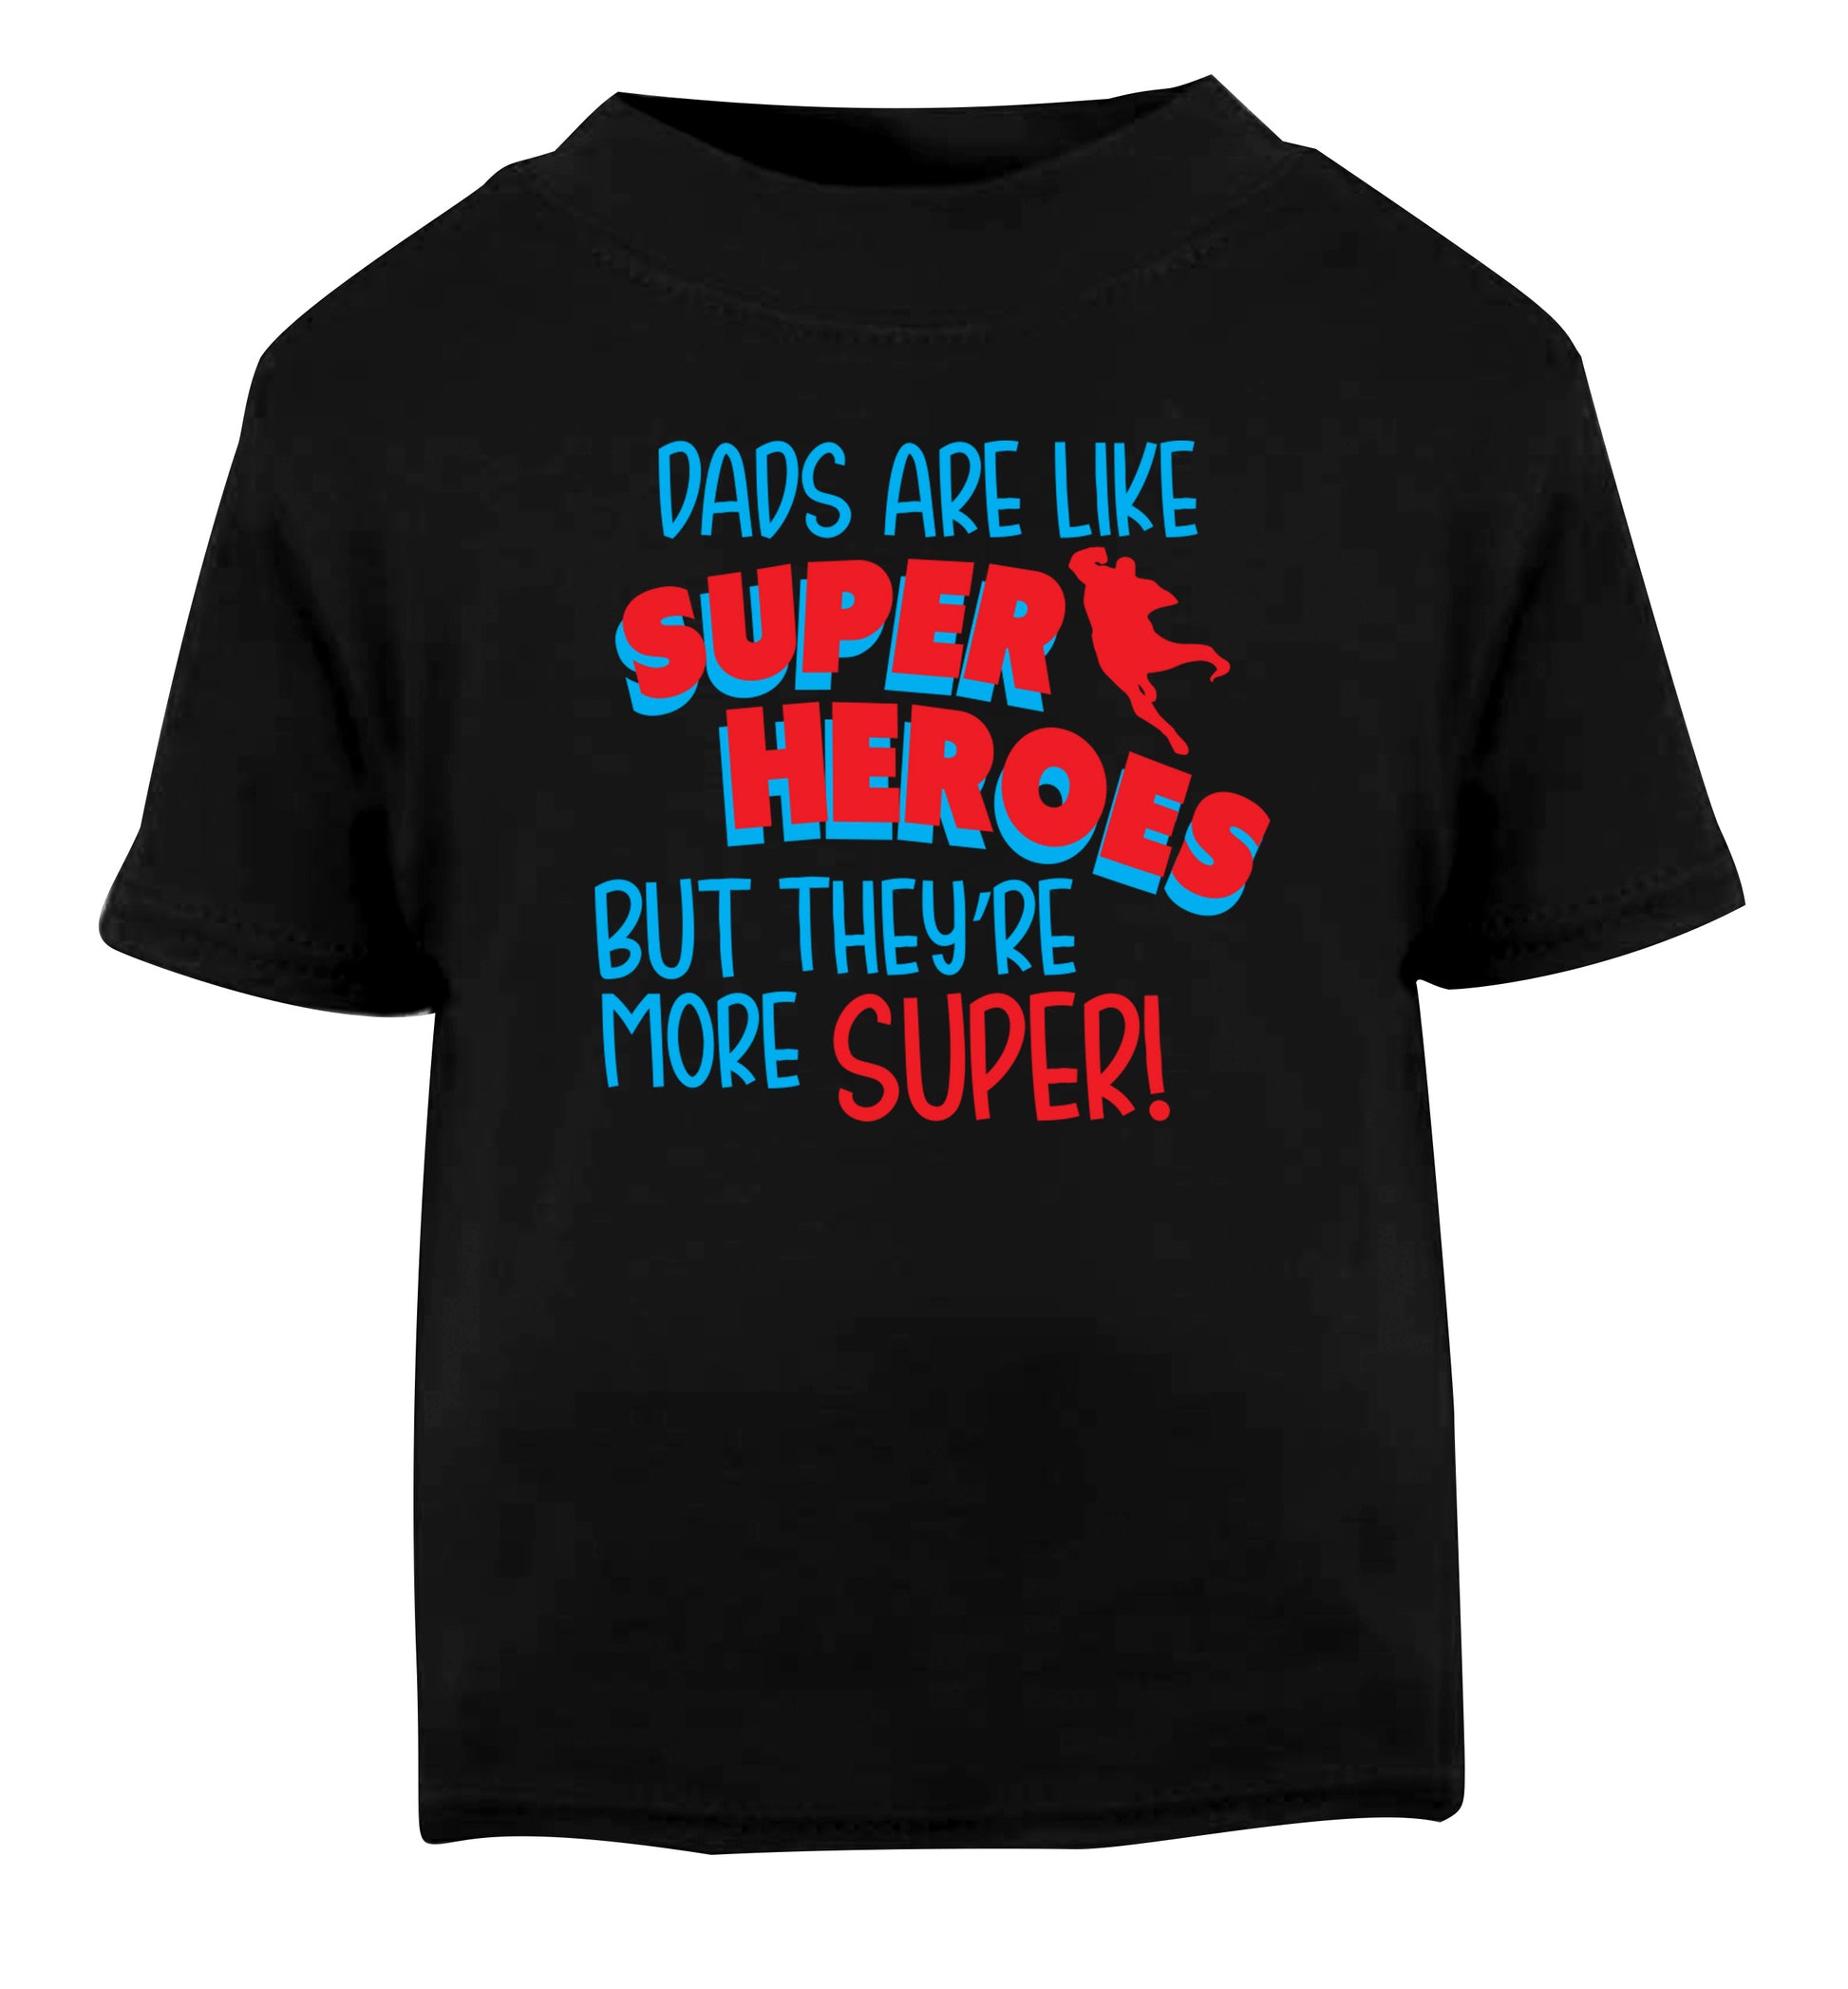 Dads are like superheros but they're more super Black Baby Toddler Tshirt 2 years